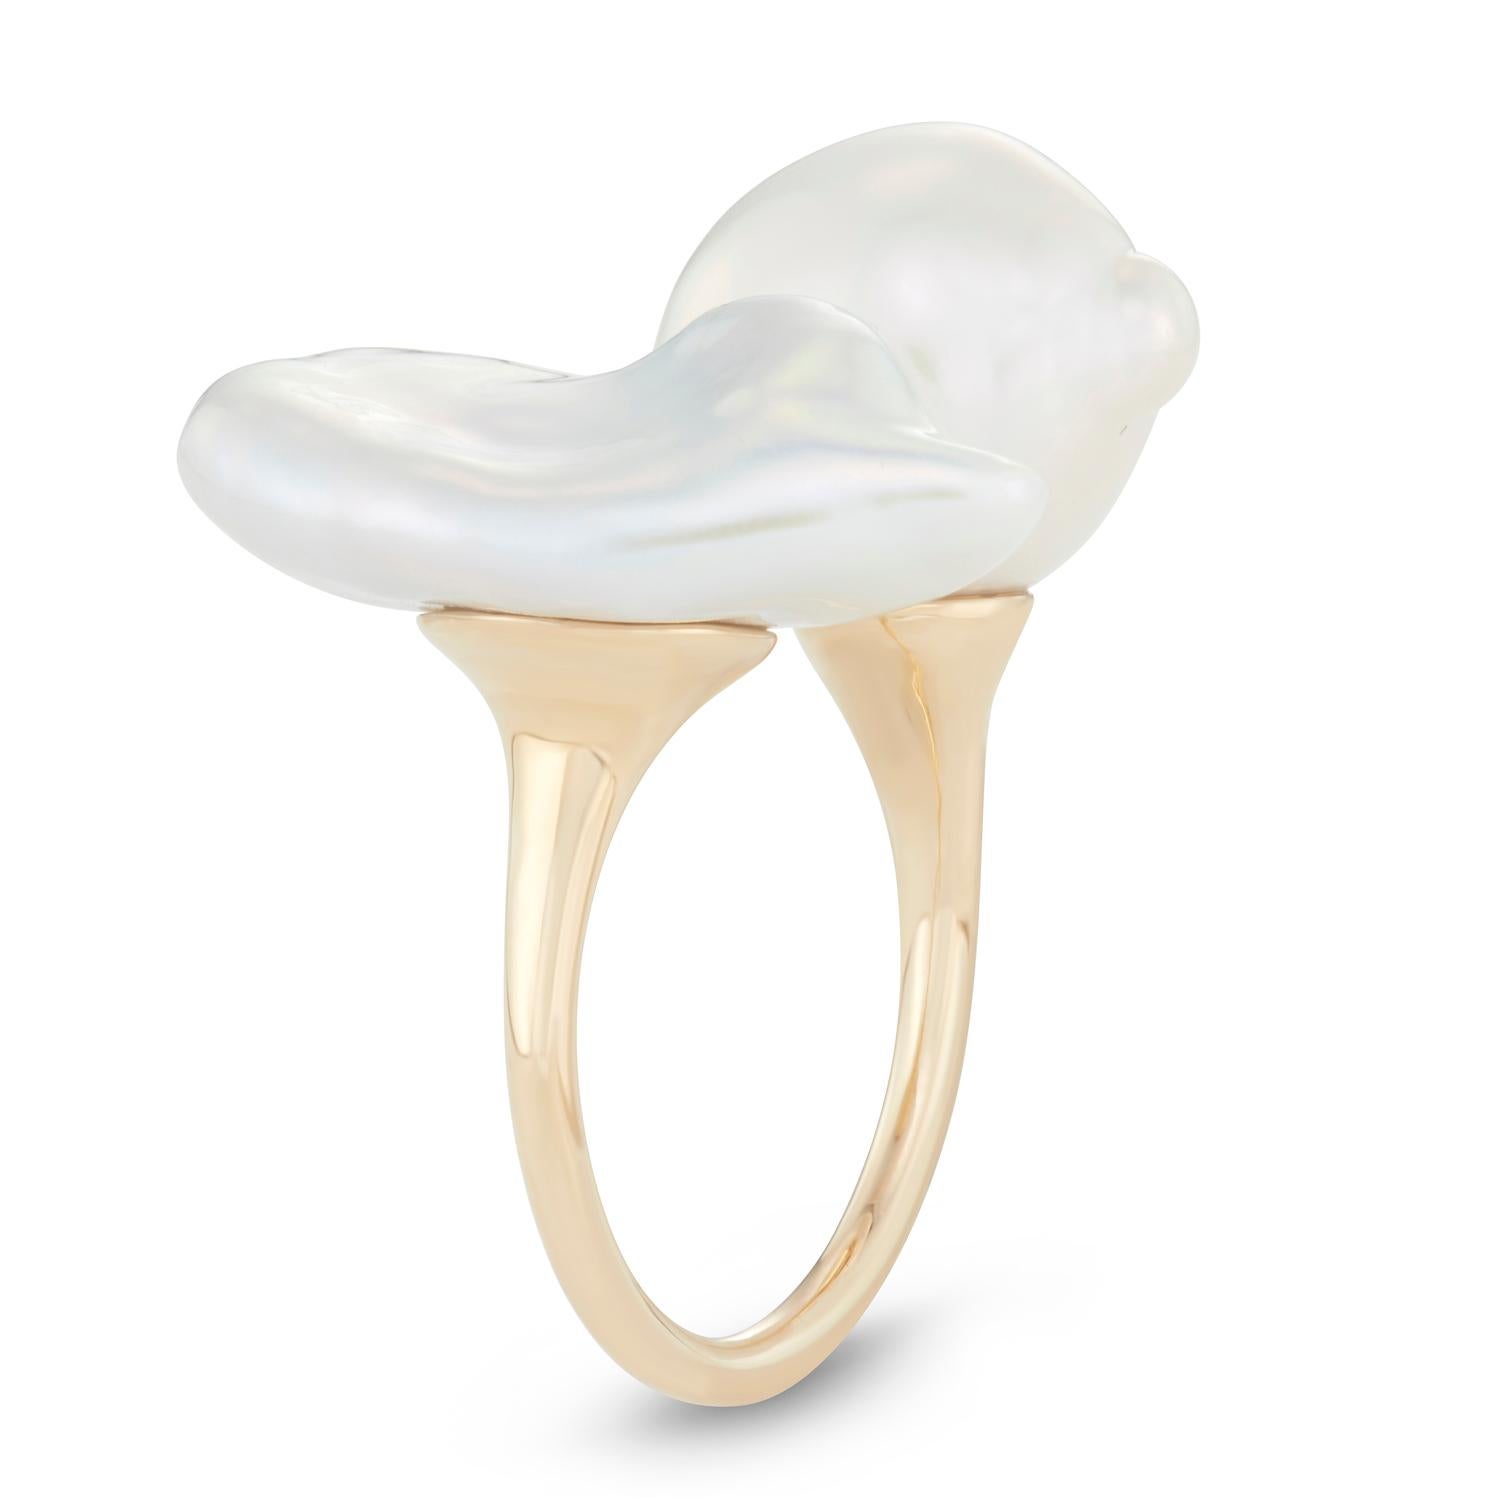 Not your traditional pearl ring, these bold cultured lustrous Baroque pearls are securely inset and pegged onto a tapered open U-shape band, making it adjustable to fit more than one ring size.
We like to wear it on our middle or index finger to